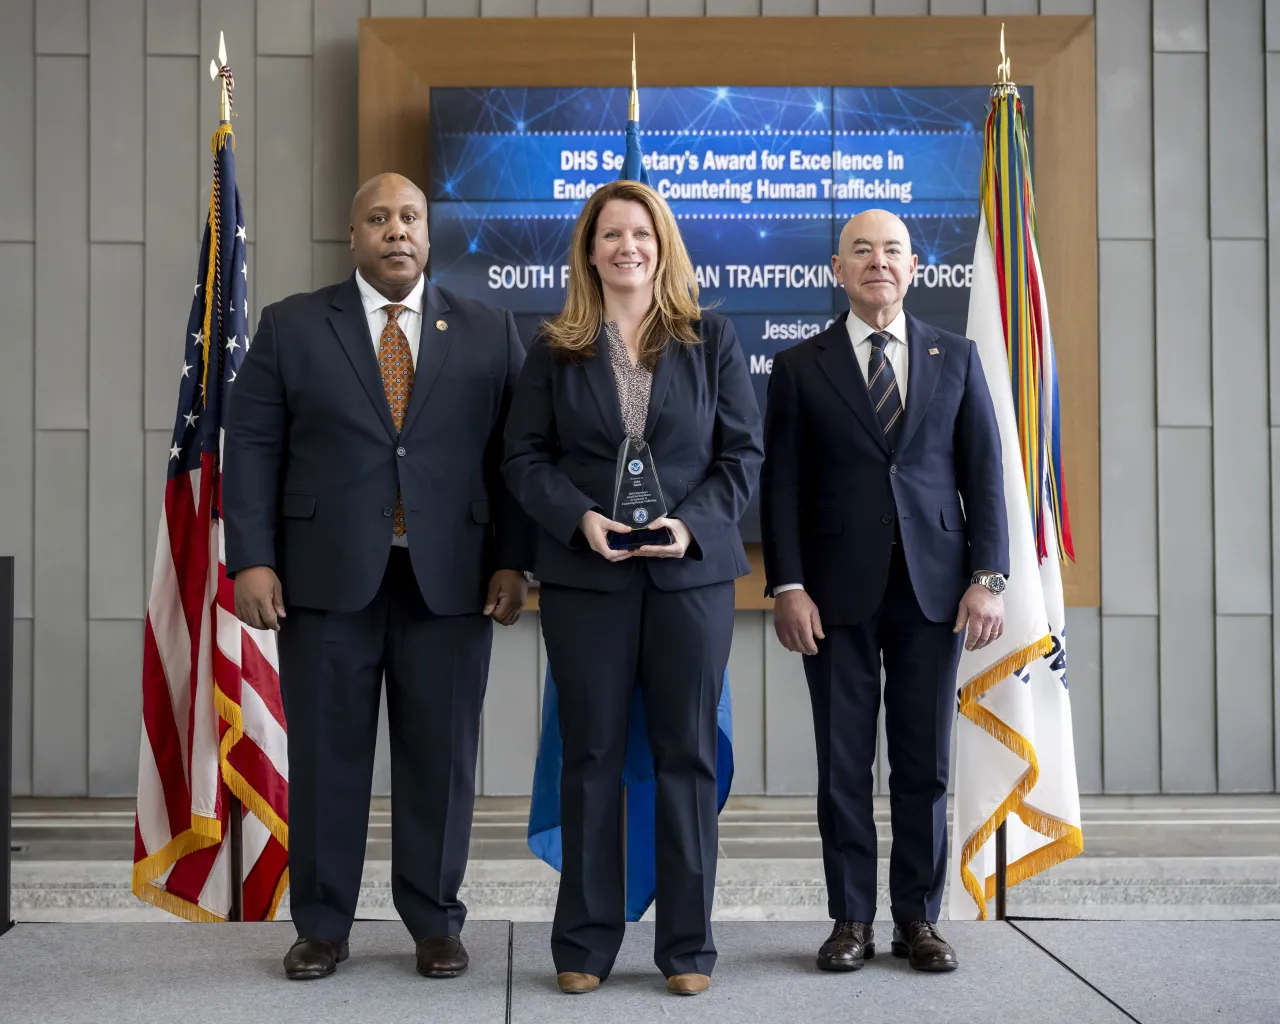 Image: DHS Secretary Alejandro Presents the DHS Annual Awards in Countering Human Trafficking  (012)